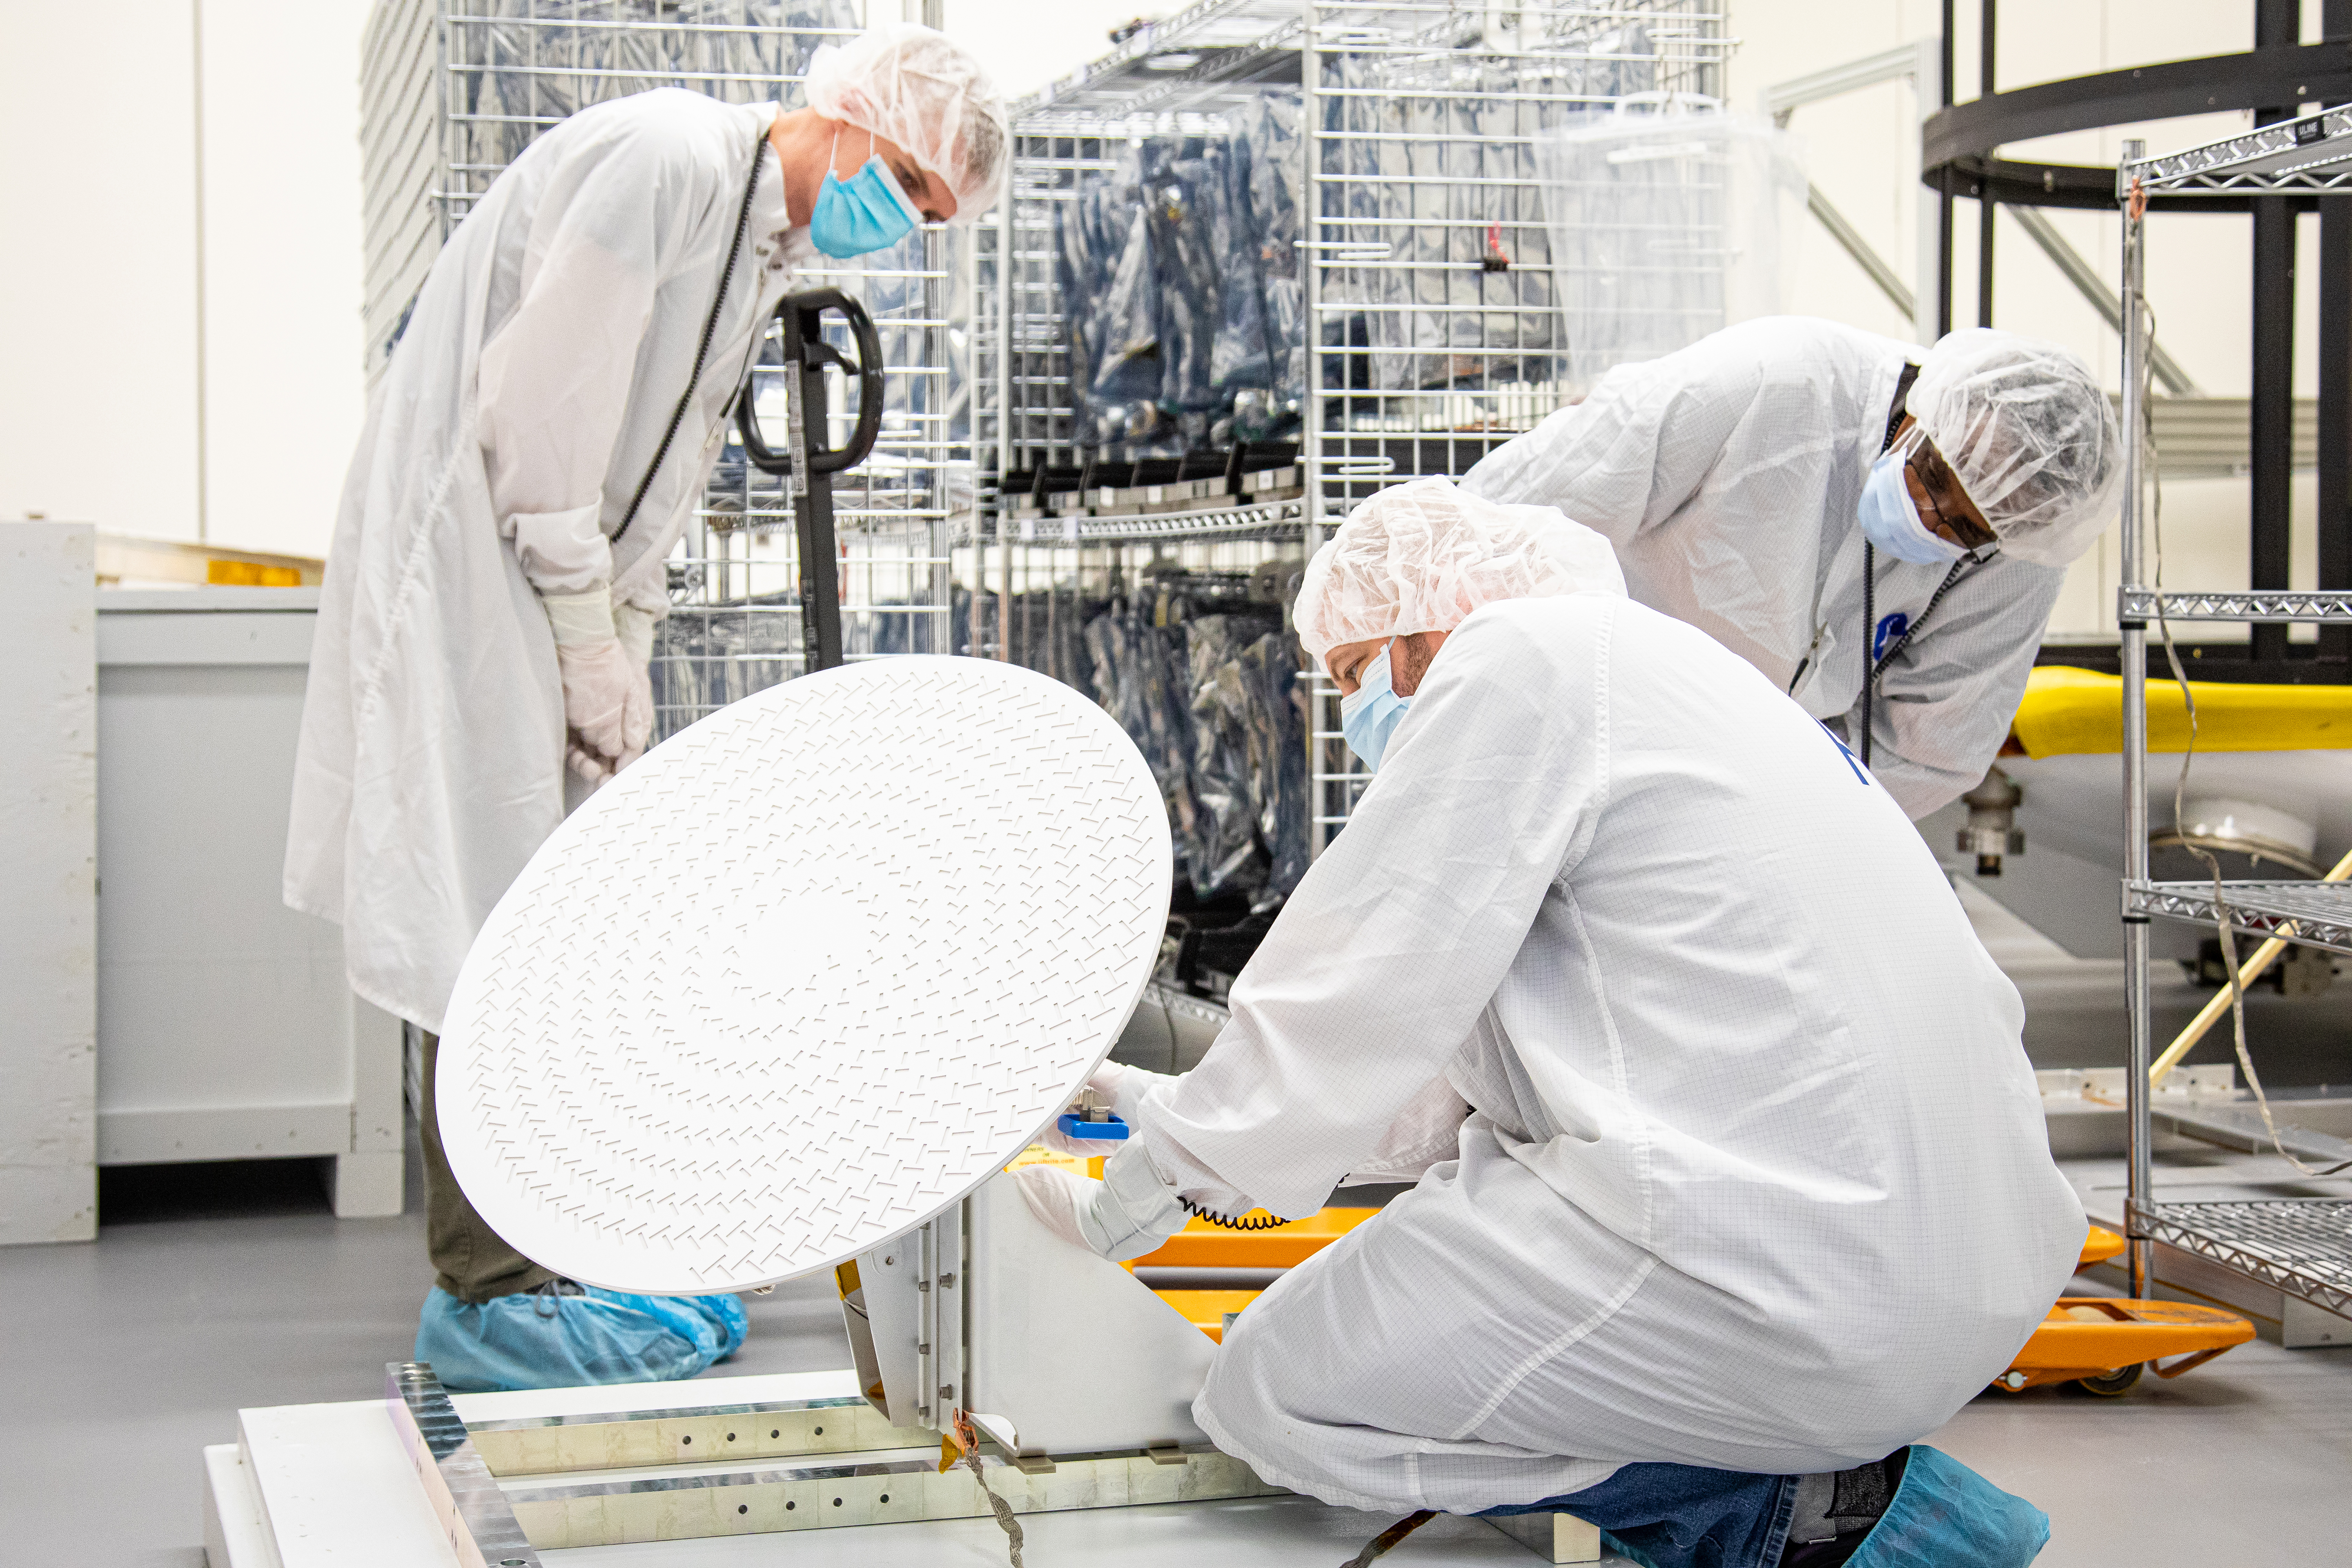 Three people in personal protective gear look over a piece of spacecraft